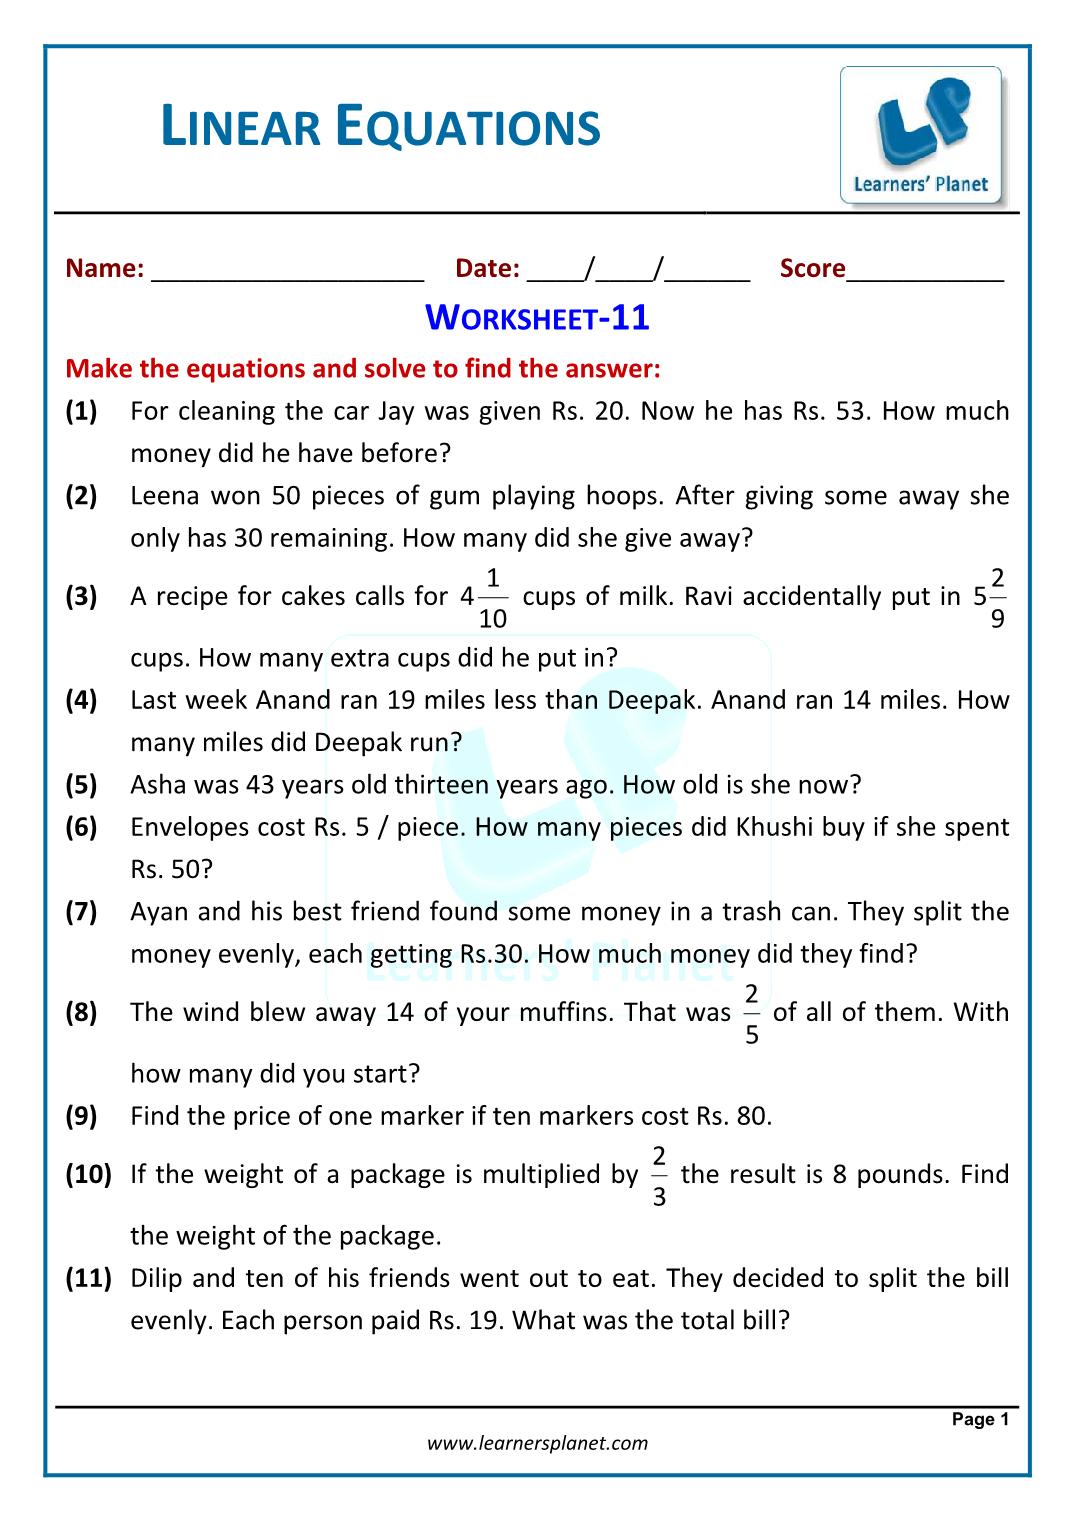 Linear Equations in One Variable Within Linear Word Problem Worksheet